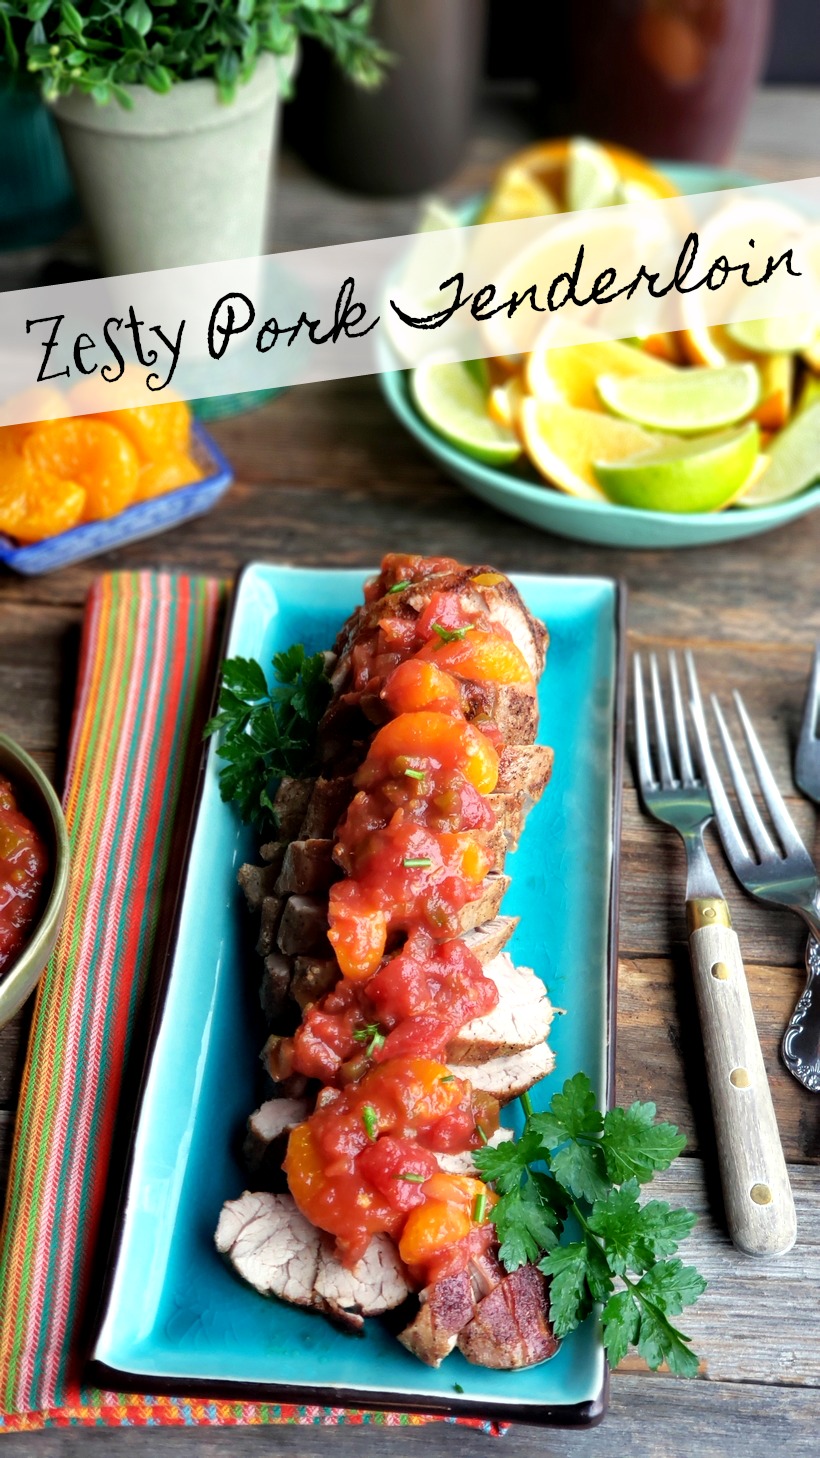 Zesty Pork Tenderloin that is quick and simple to prepare. You will absolutely love this tried and true recipe. #noblepig #pork #porktenderloin